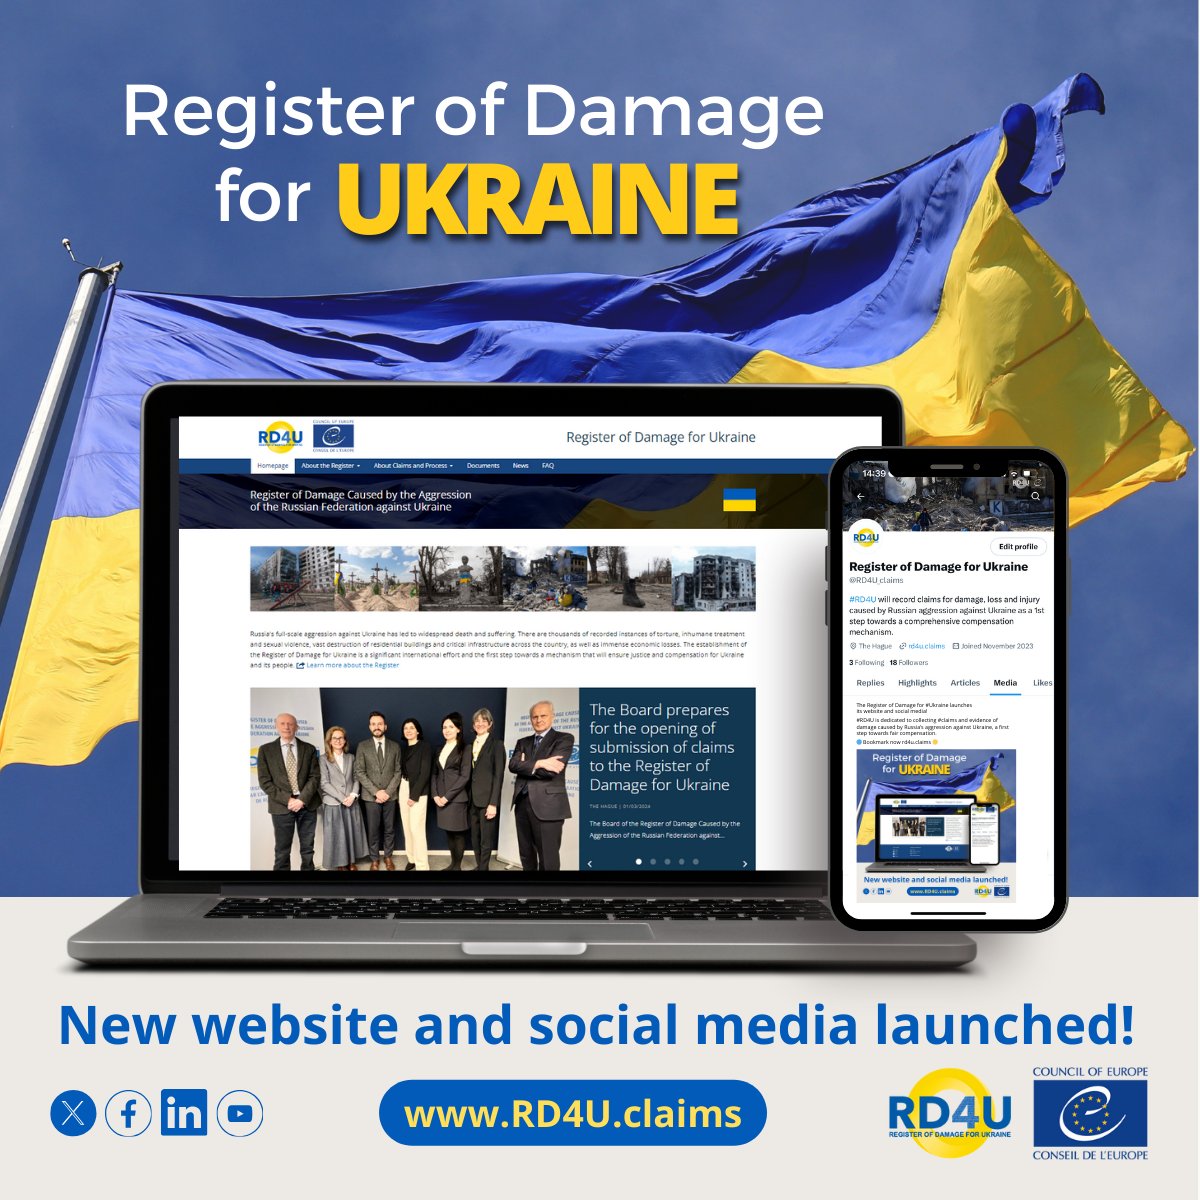 The Register of Damage for #Ukraine launches its website and social media! #RD4U is dedicated to collecting #claims and evidence of damage caused by Russia’s aggression against Ukraine, a first step towards fair compensation. 🔵 Bookmark now rd4u.claims 🟡